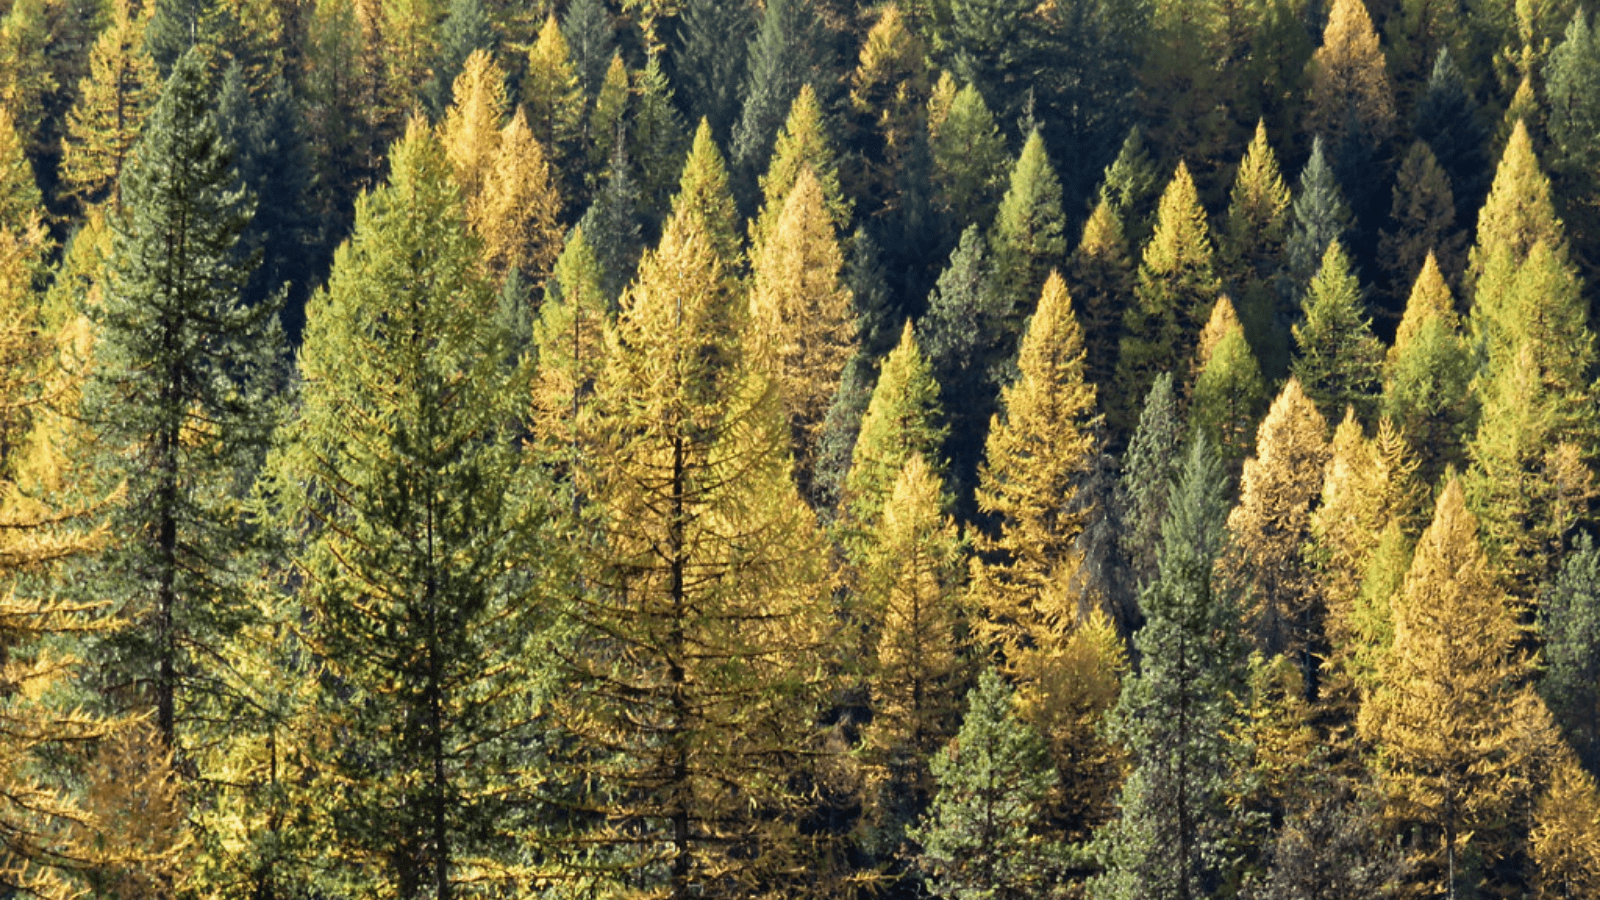 Western larch forest